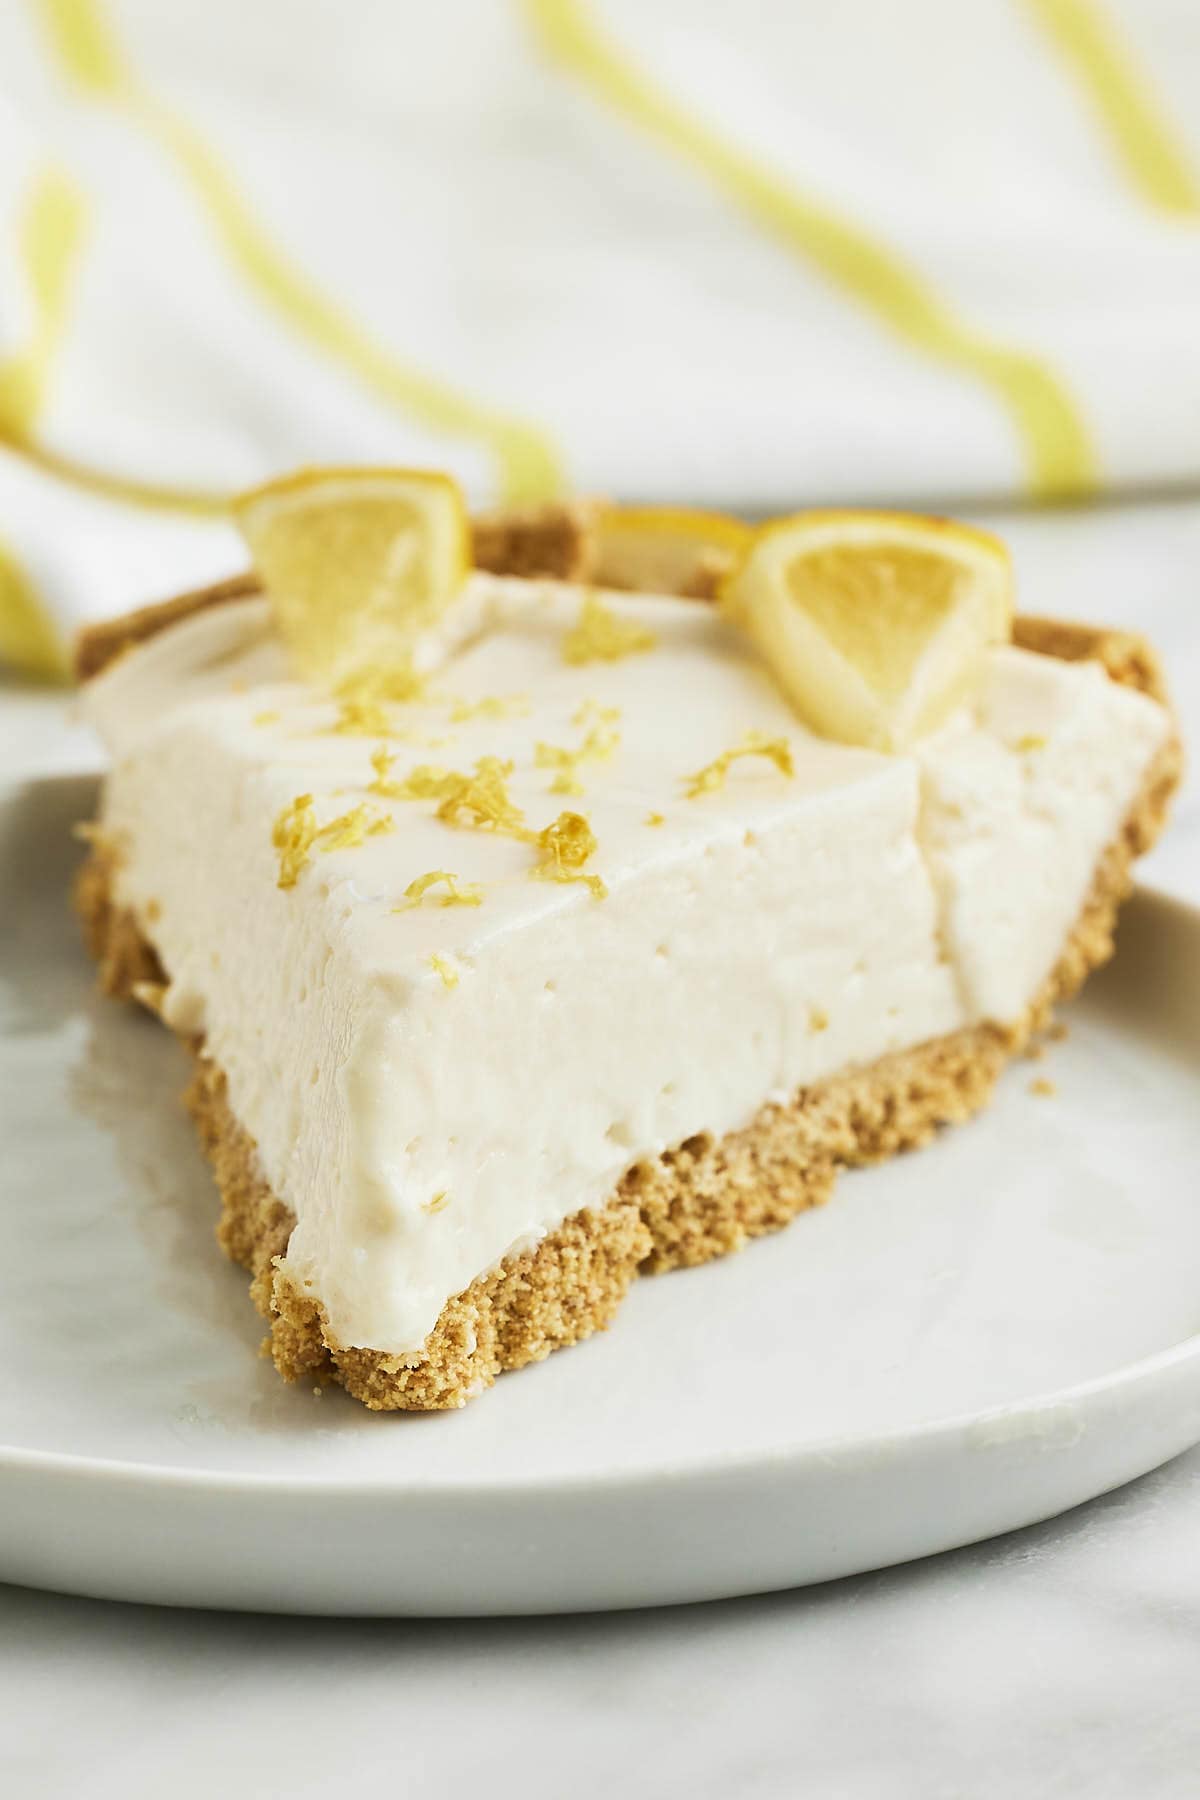 A slice of Lemon Cheesecake on a white plate.